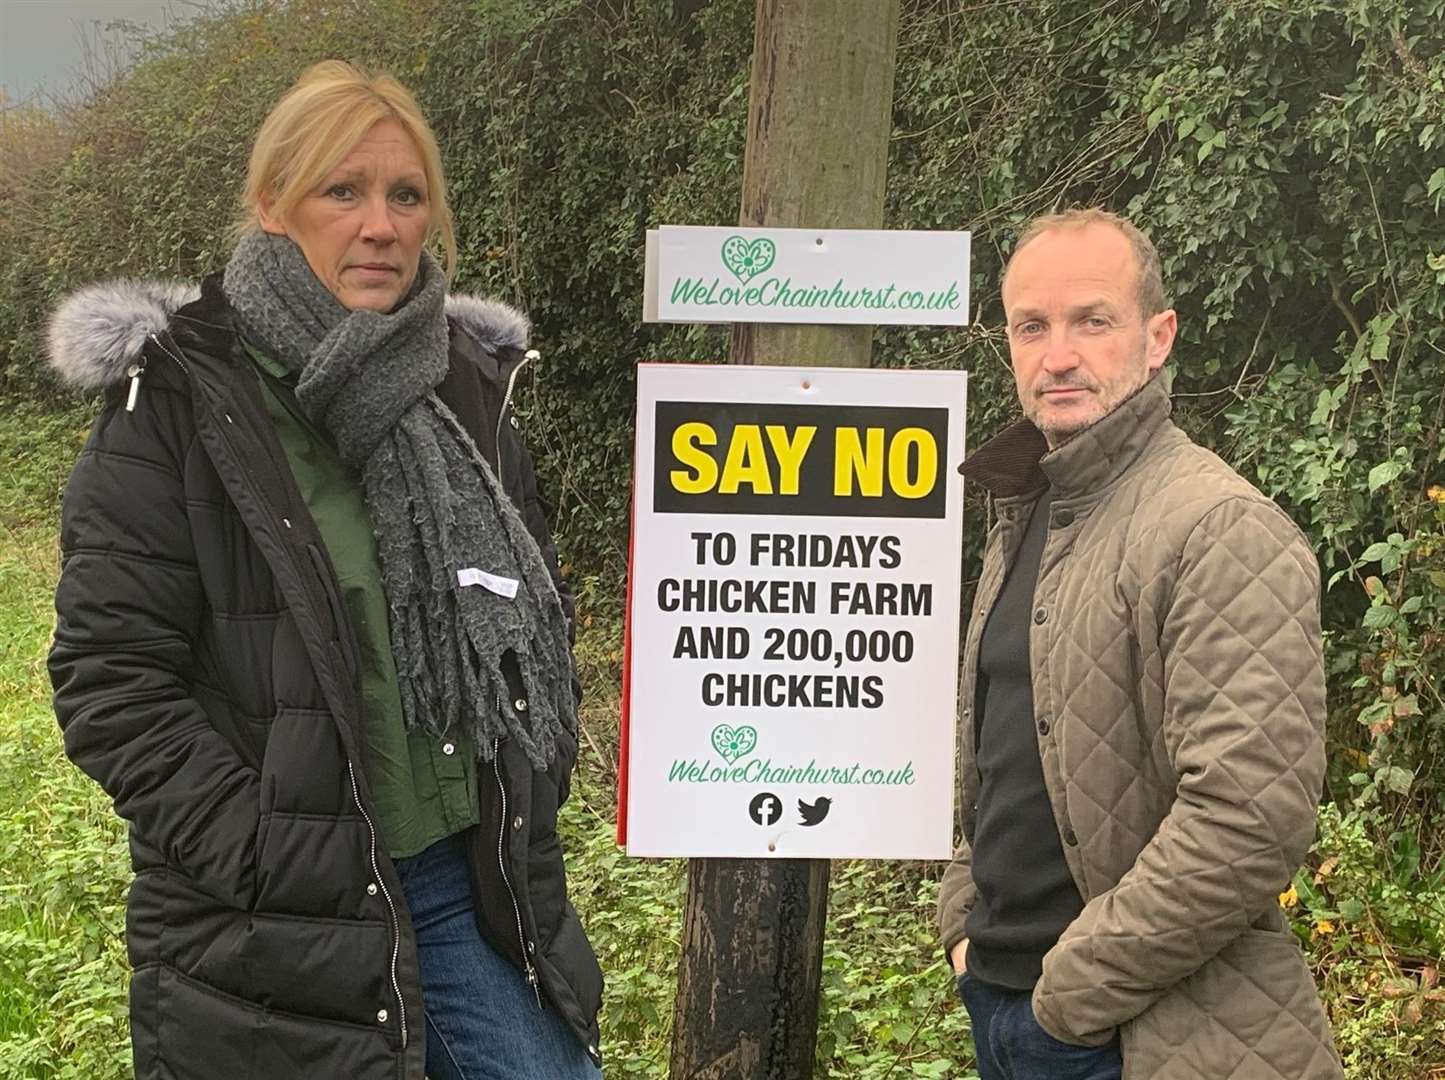 Adelle and Kevin Back at the site of the proposed chicken farm in Chainhurst which is prone to flooding